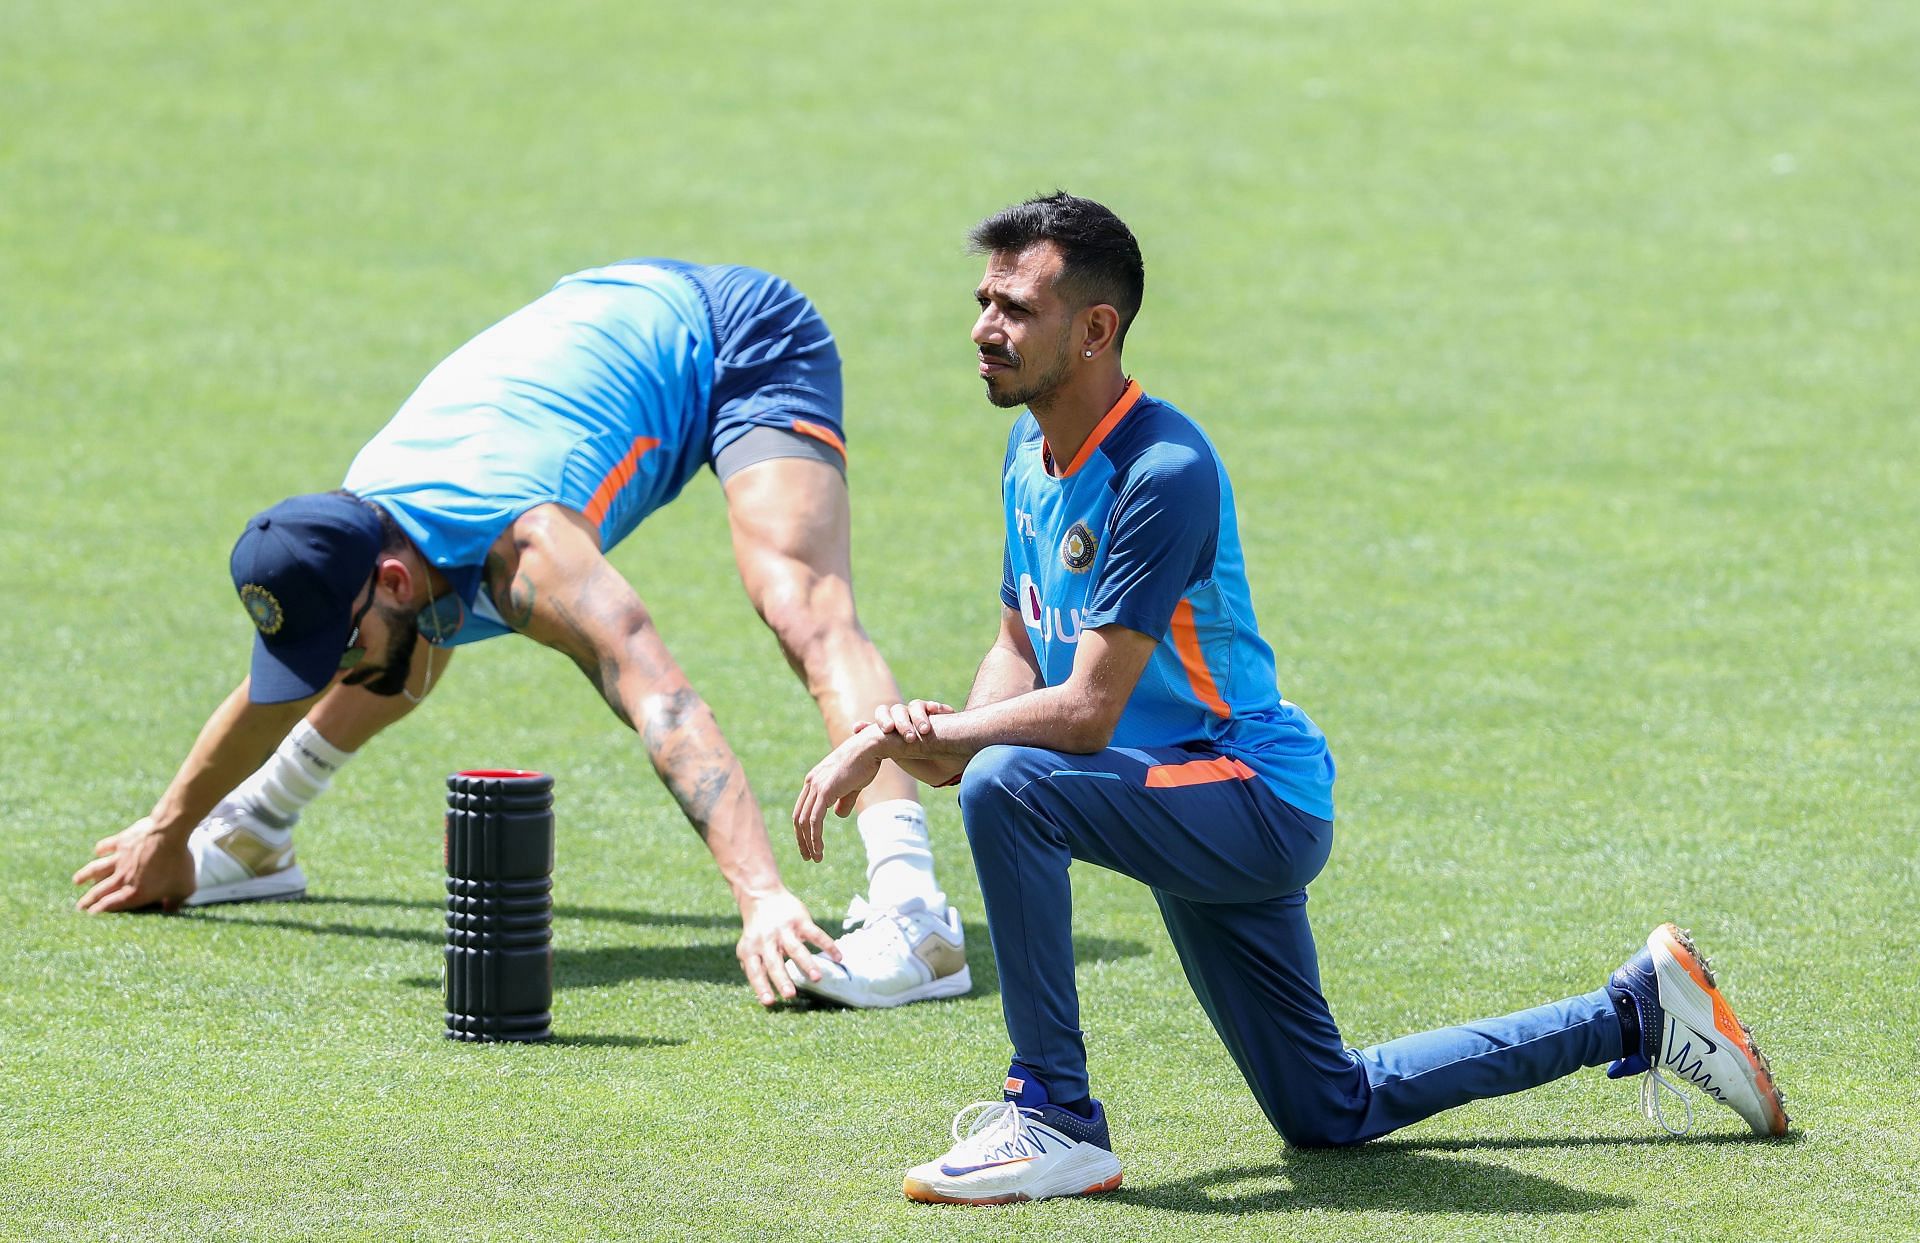 &lt;a href=&#039;https://www.sportskeeda.com/player/yuzvendra-chahal&#039; target=&#039;_blank&#039; rel=&#039;noopener noreferrer&#039;&gt;Yuzvendra Chahal&lt;/a&gt; has played just 2 ODIs this year picking up 3 wickets